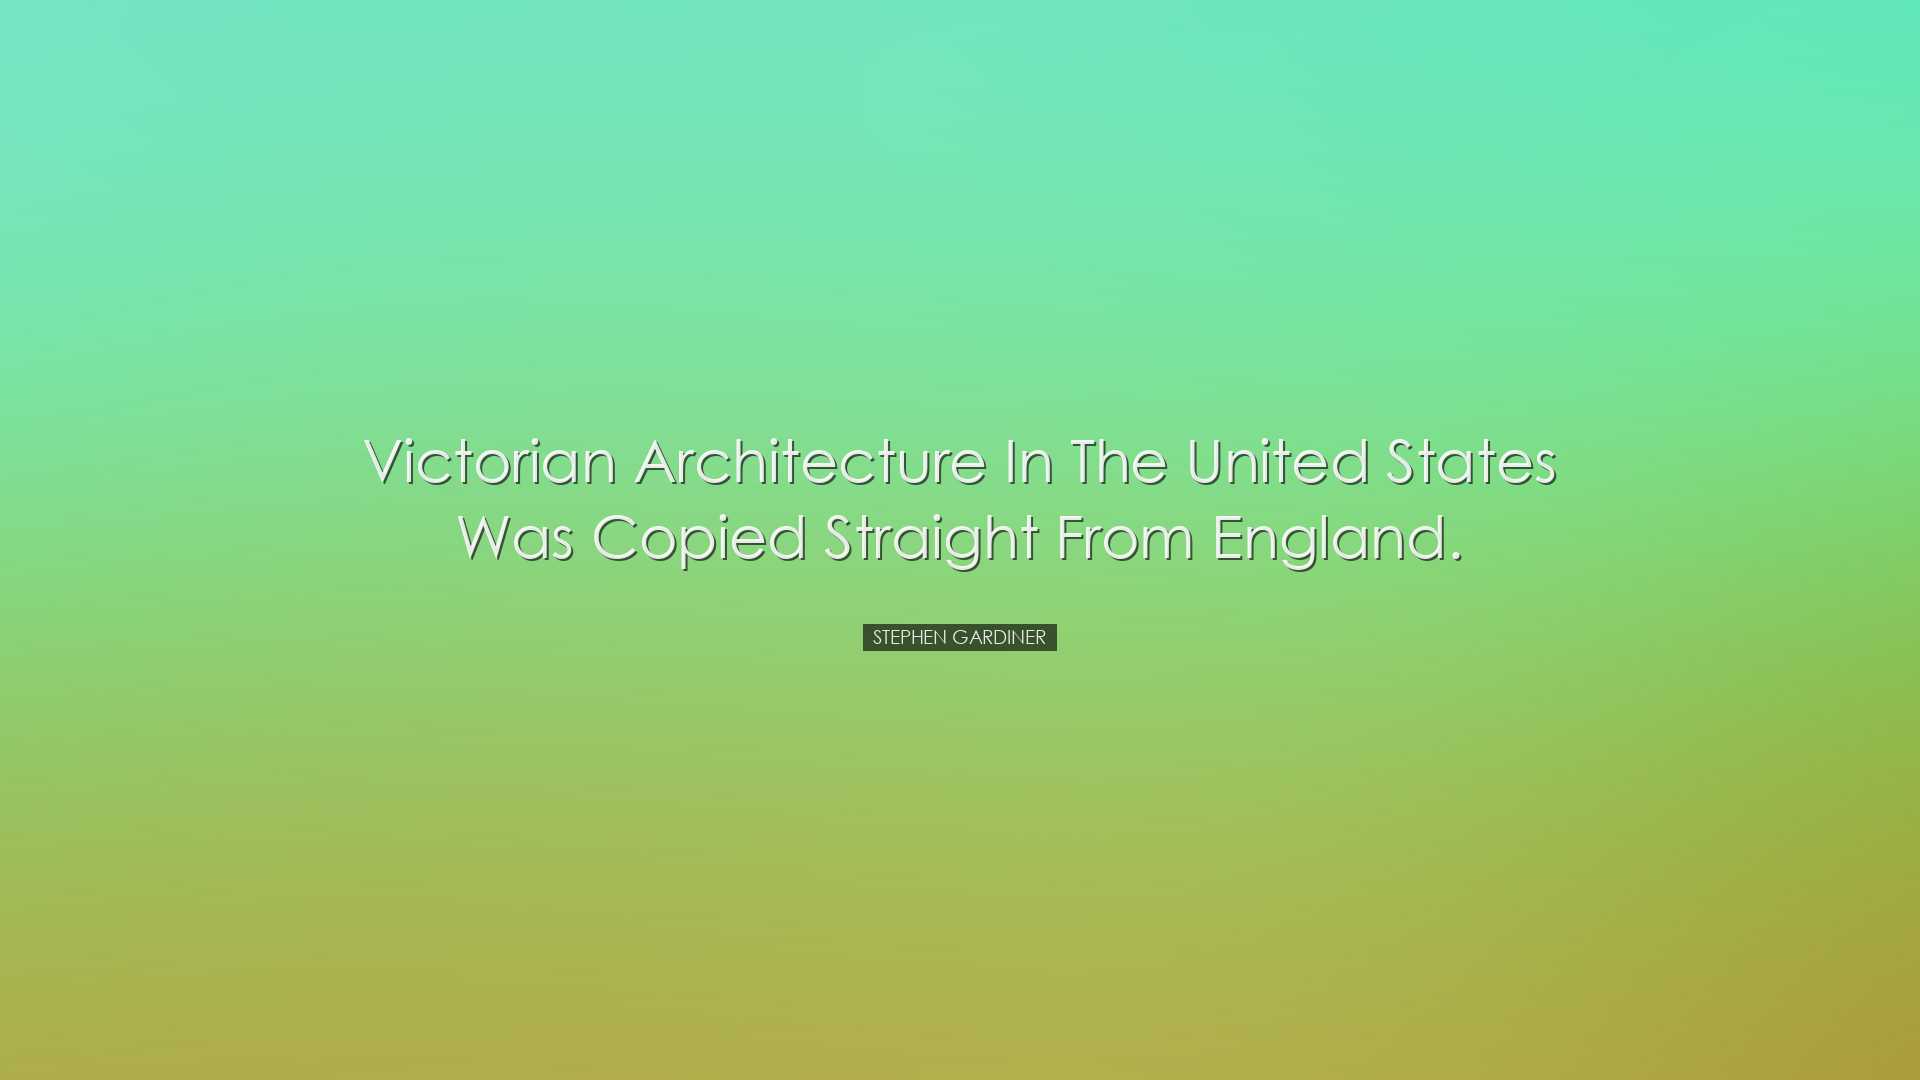 Victorian architecture in the United States was copied straight fr